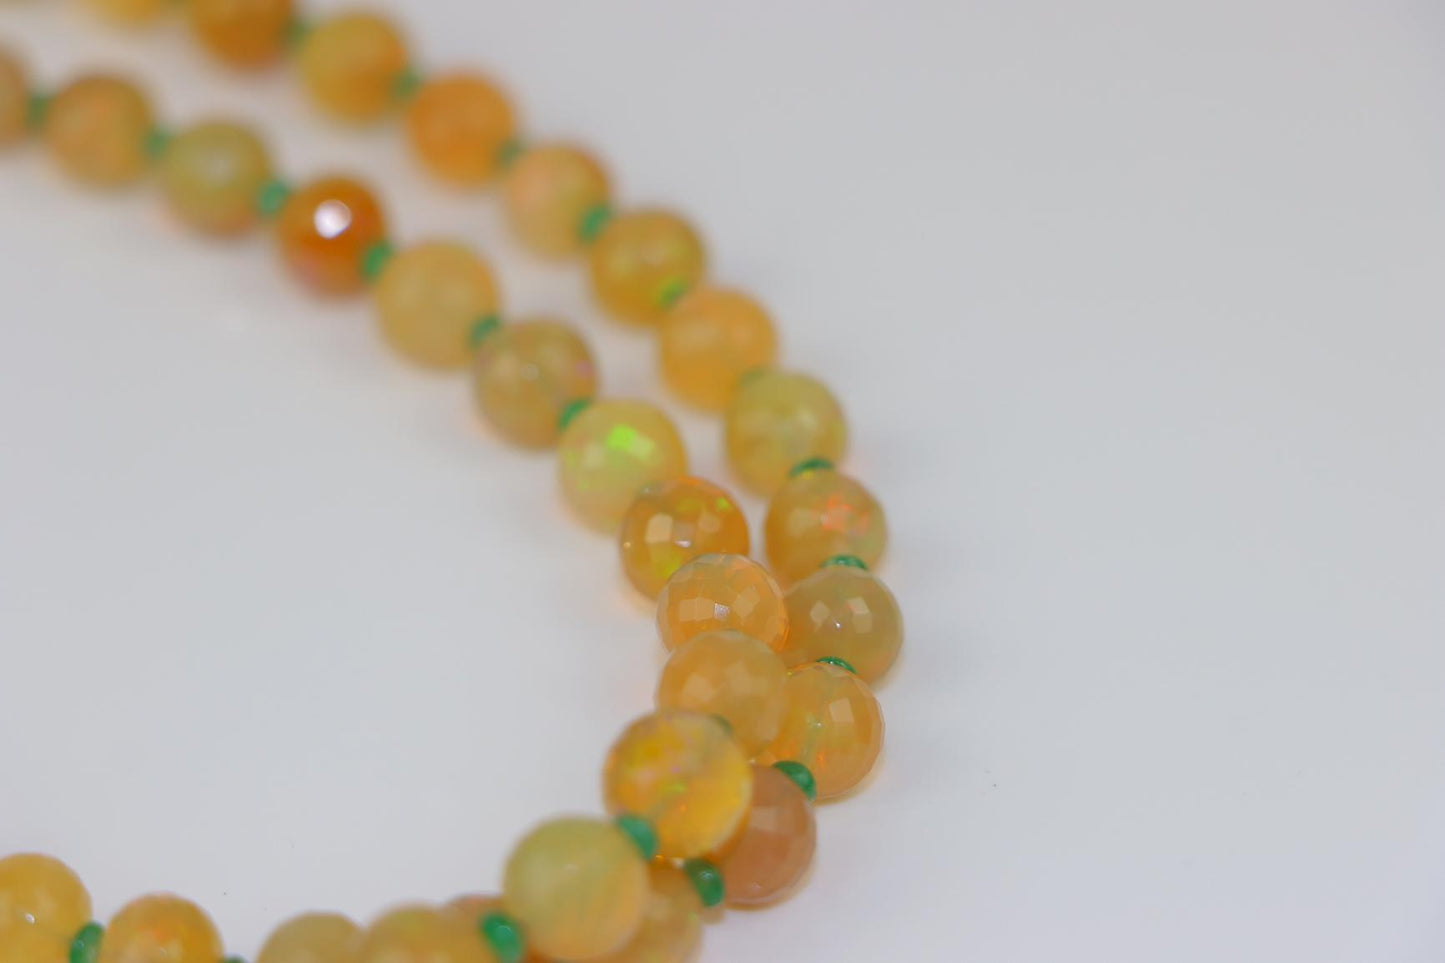 A 14K Gold Opal Emerald and Coral Bead Necklace